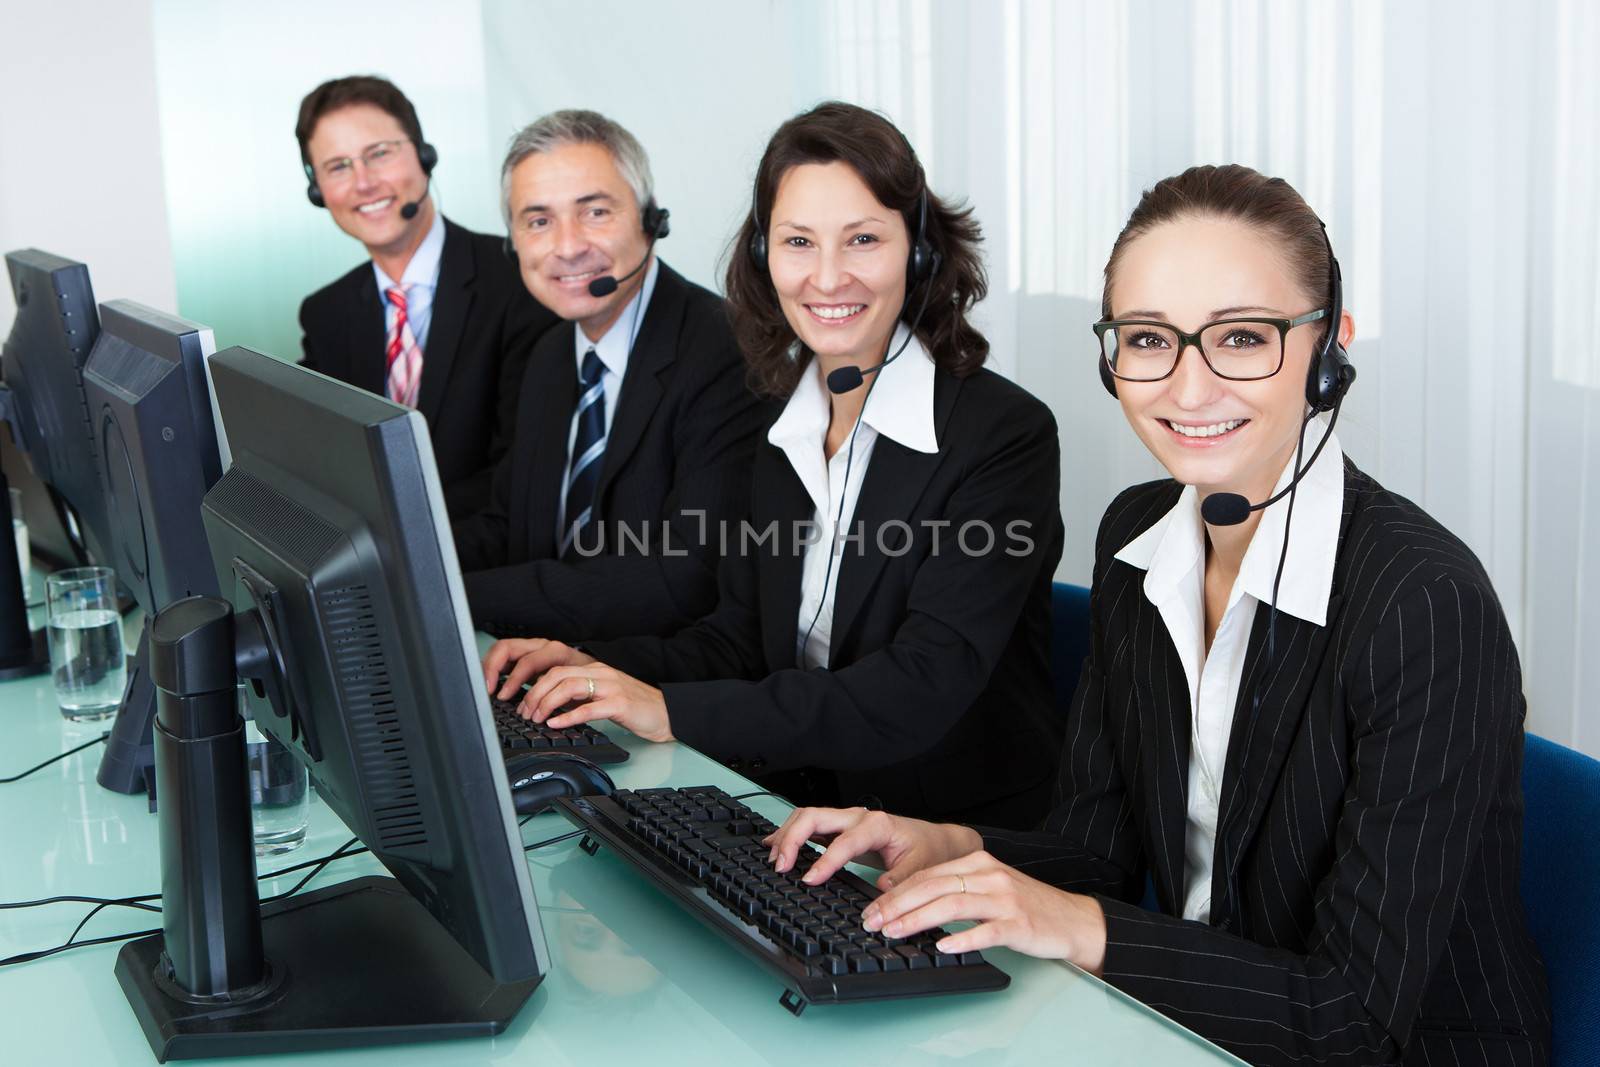 Line of professional stylish call centre operators wearing headsets seated behind their computers giving assistance